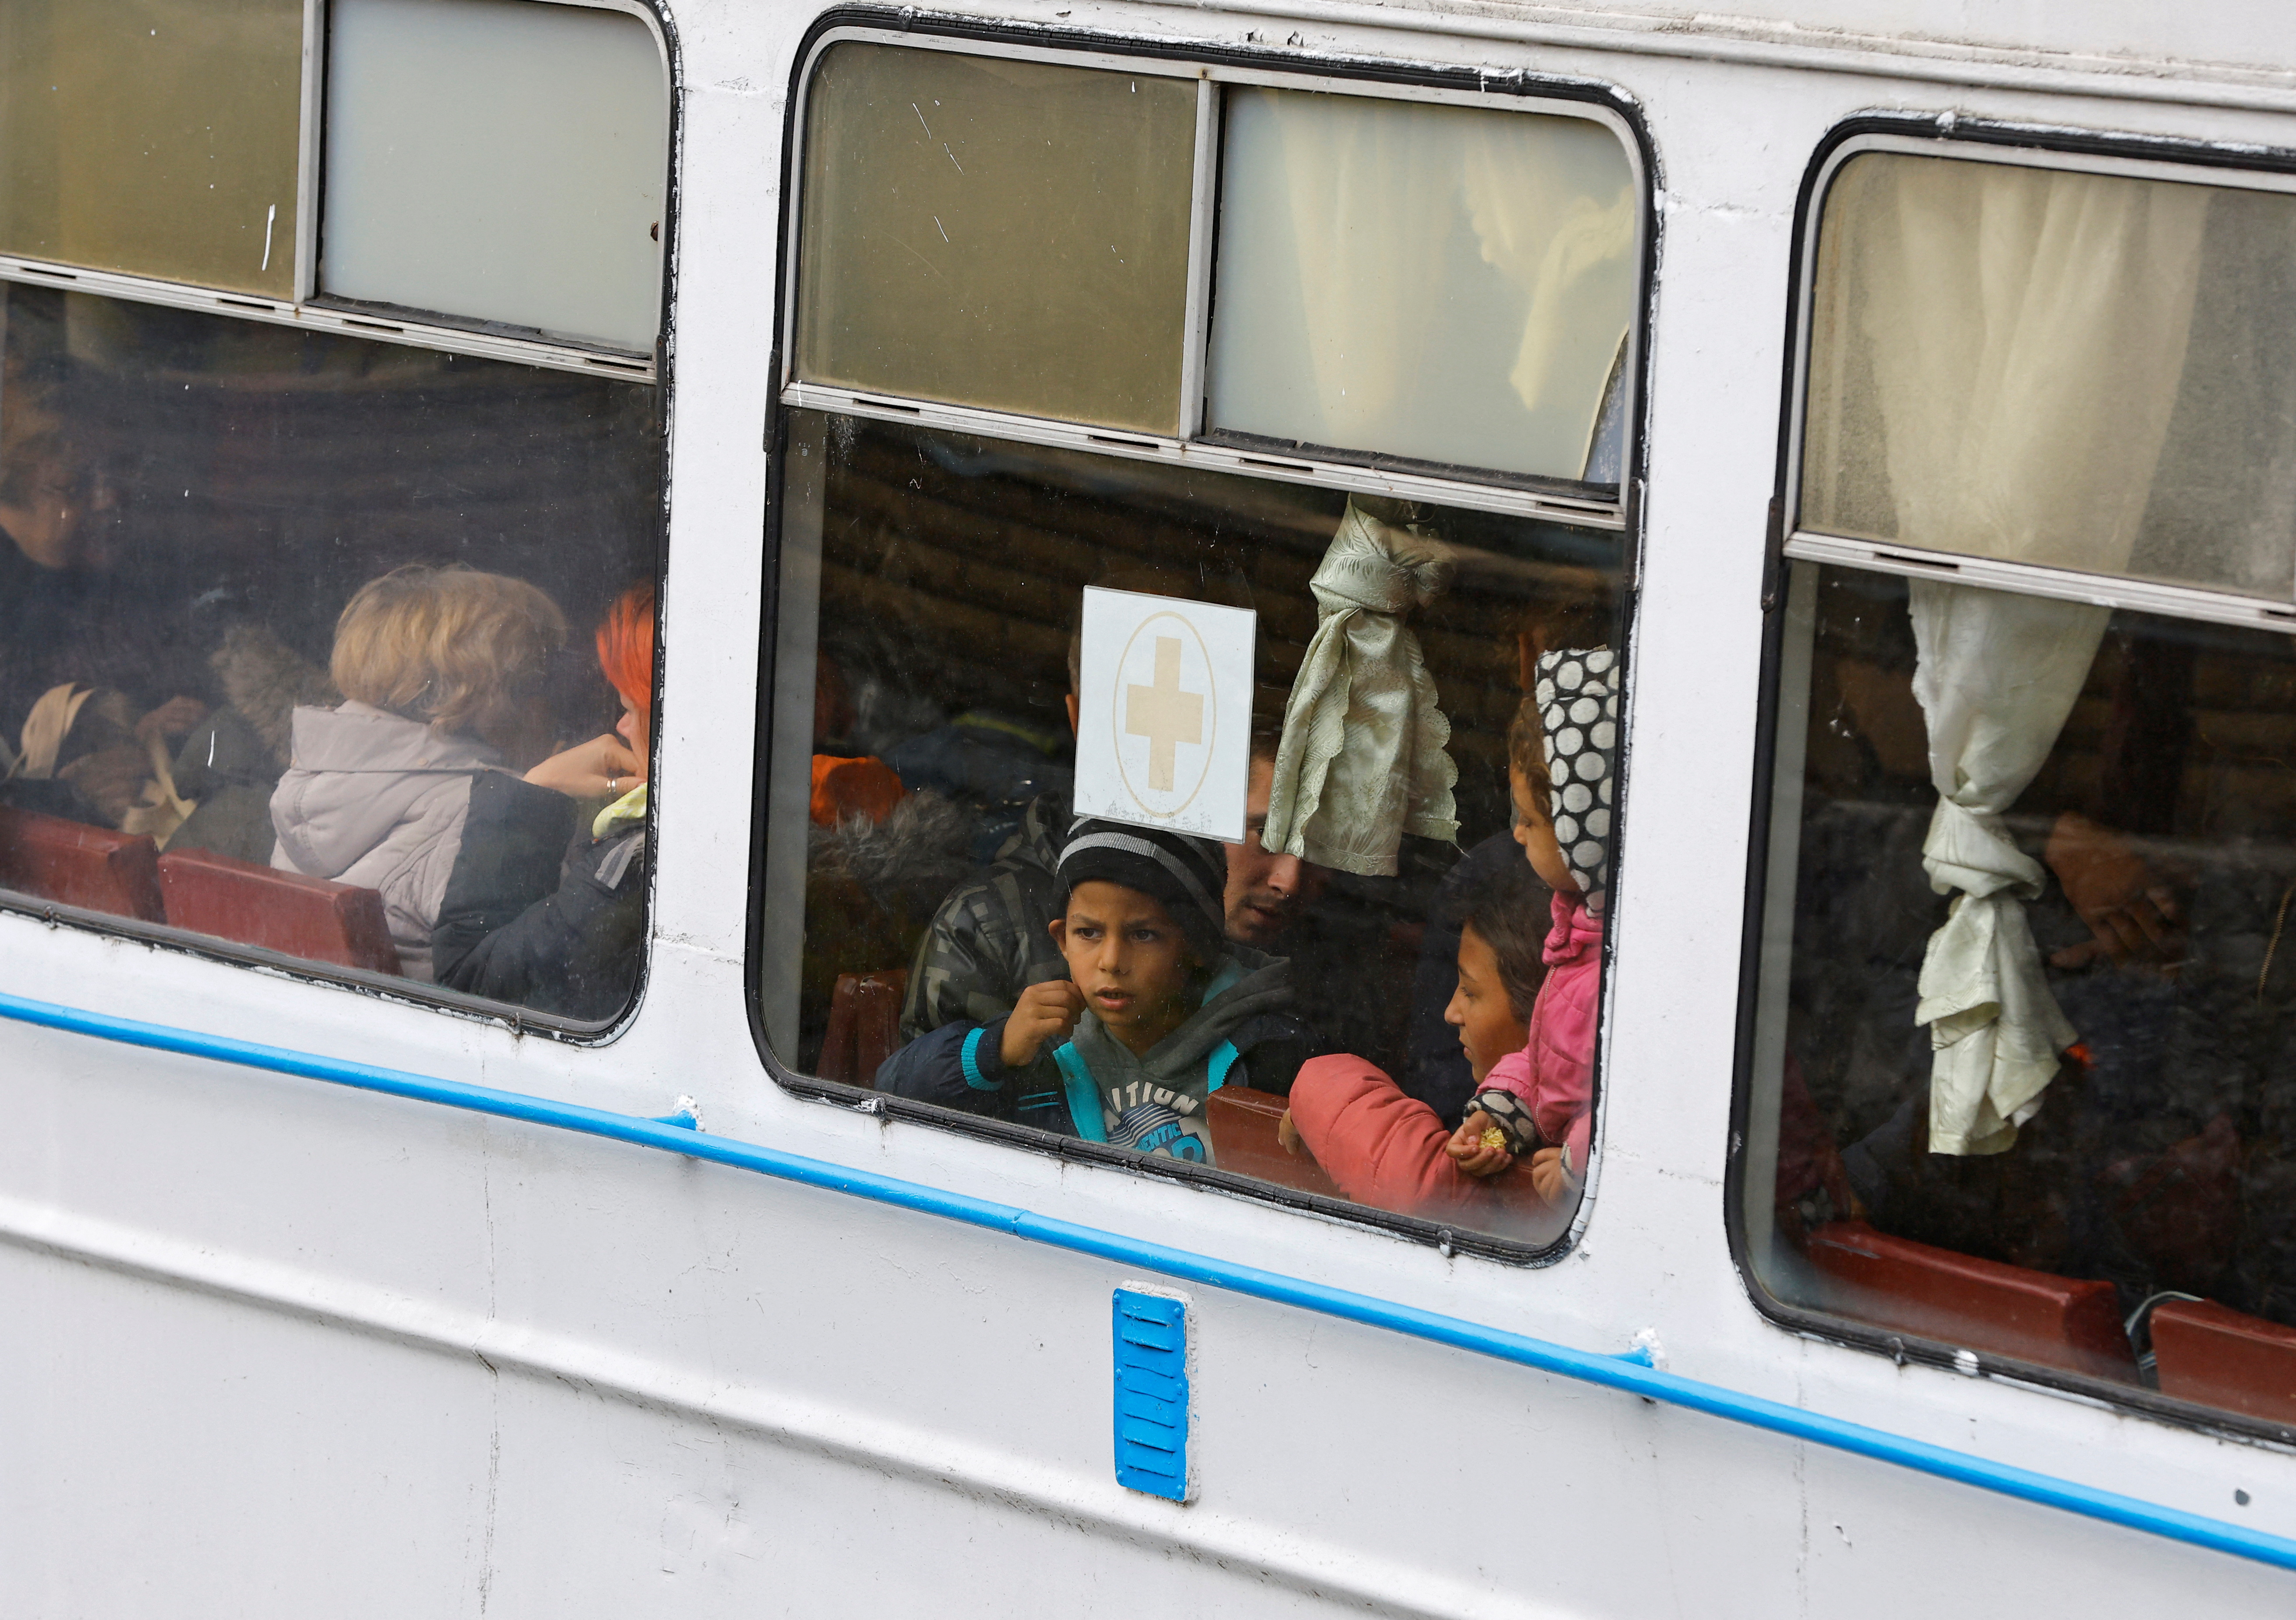 Civilians evacuated from Kherson arrive by ferry in Oleshky